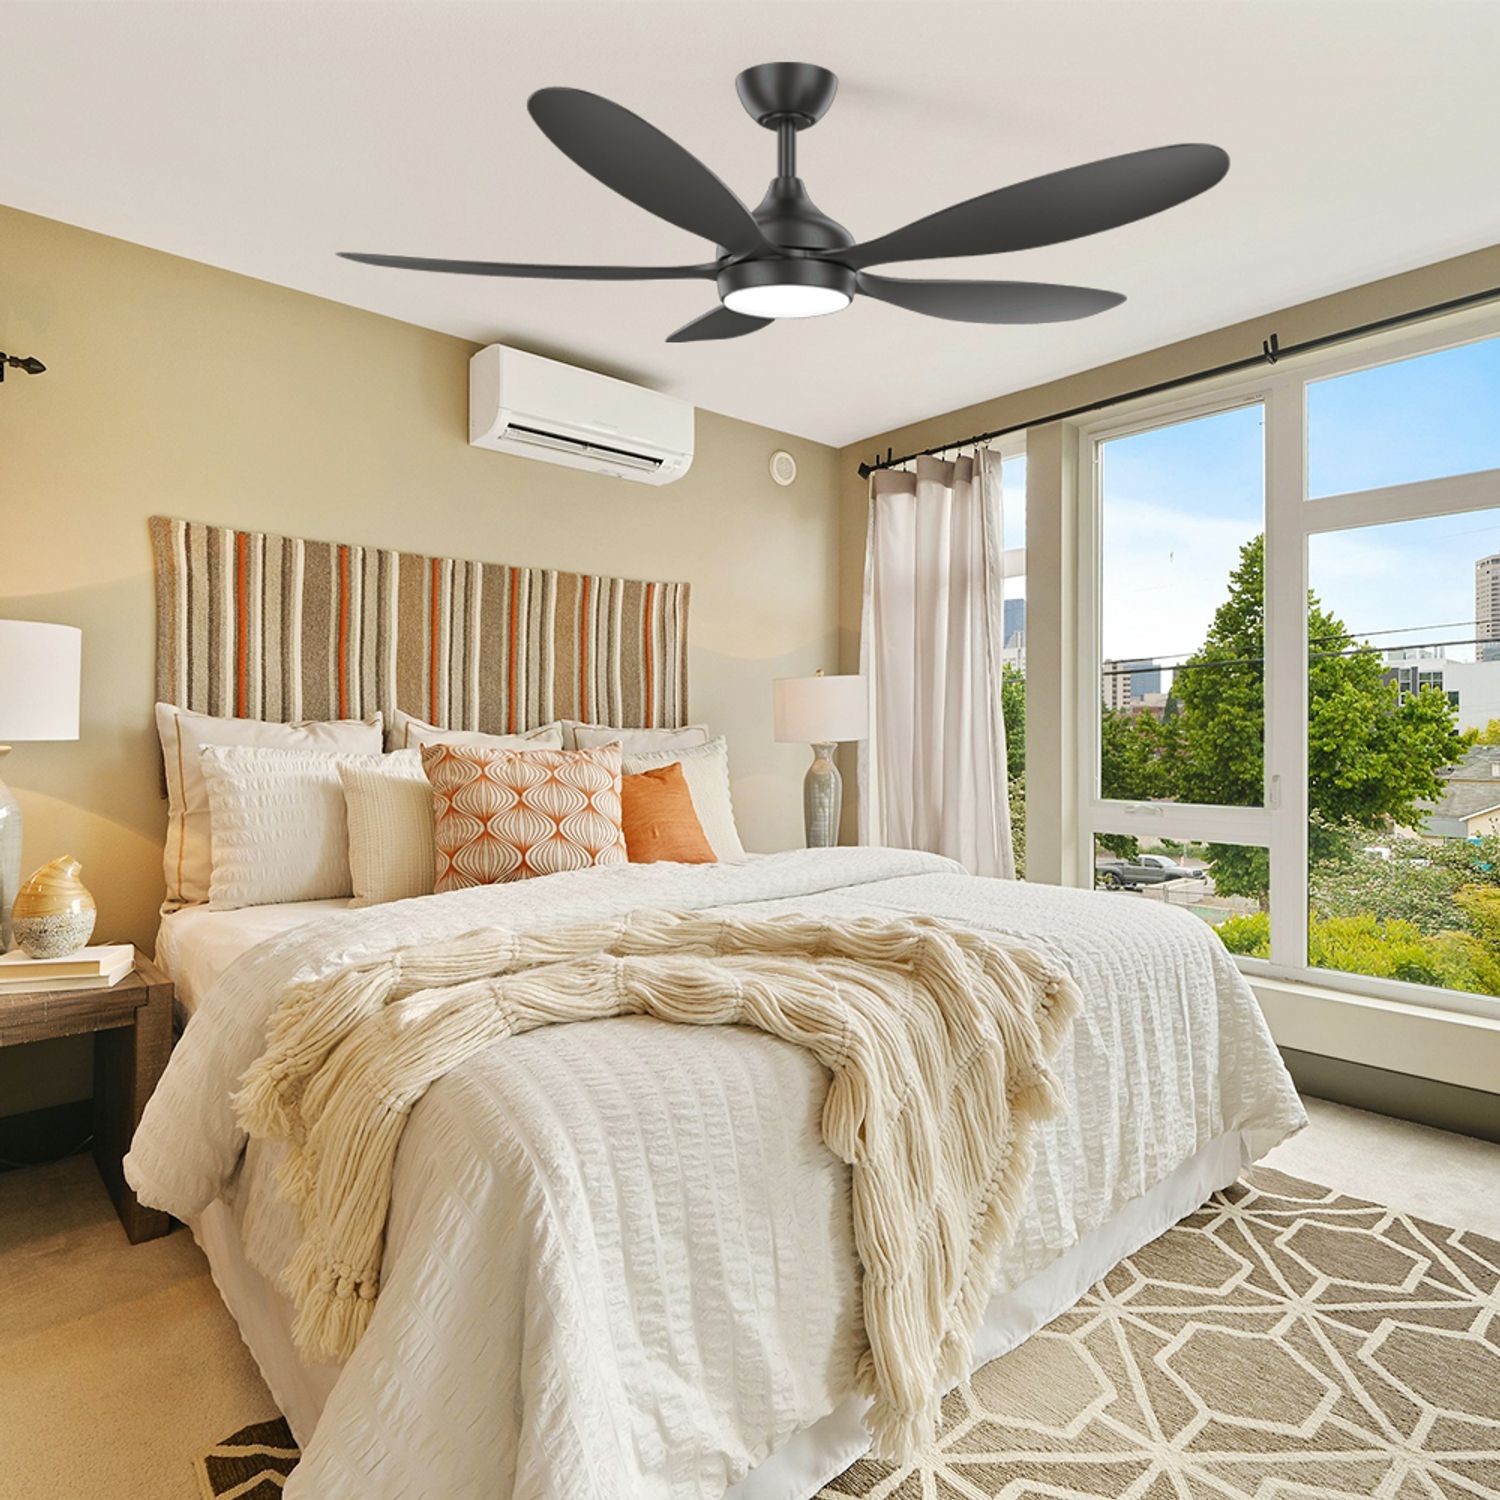 KBS Black smartphone controlled ceiling fan with light in a bedroom